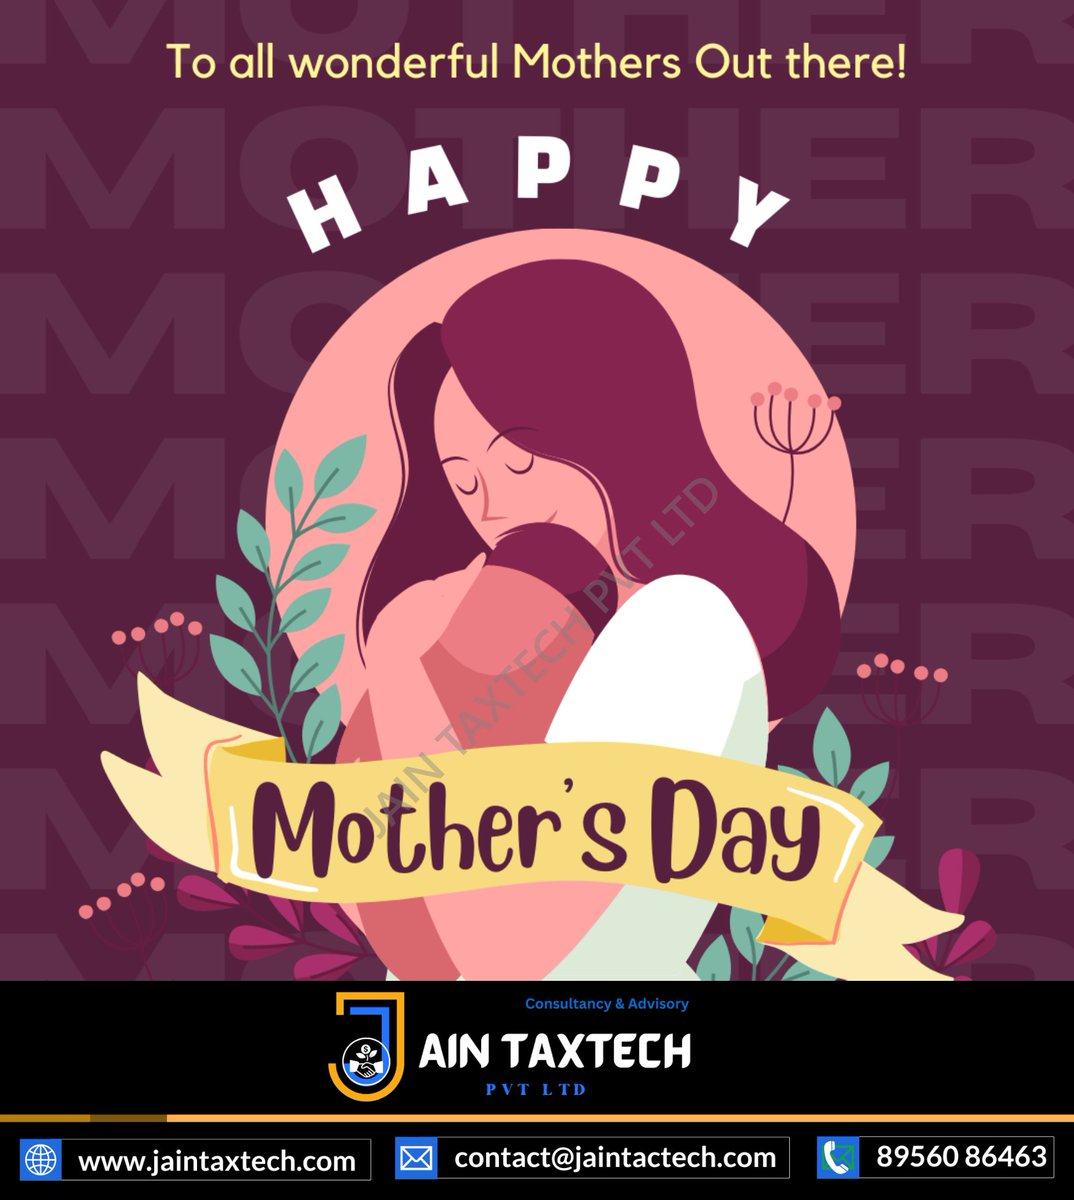 Happy Mother's Day!🌸💖 Celebrating the Unconditional Love, Sacrifice, and Strength of Mothers Everywhere. Jain TaxTech Wishes All Moms a Day Filled with Love and Appreciation!🌷👩‍👧‍👦#MomLife #Motherhood  #SuperMom #ThanksMom #MomGoals #JainTaxTech #AccountingServices #CAConsultancy